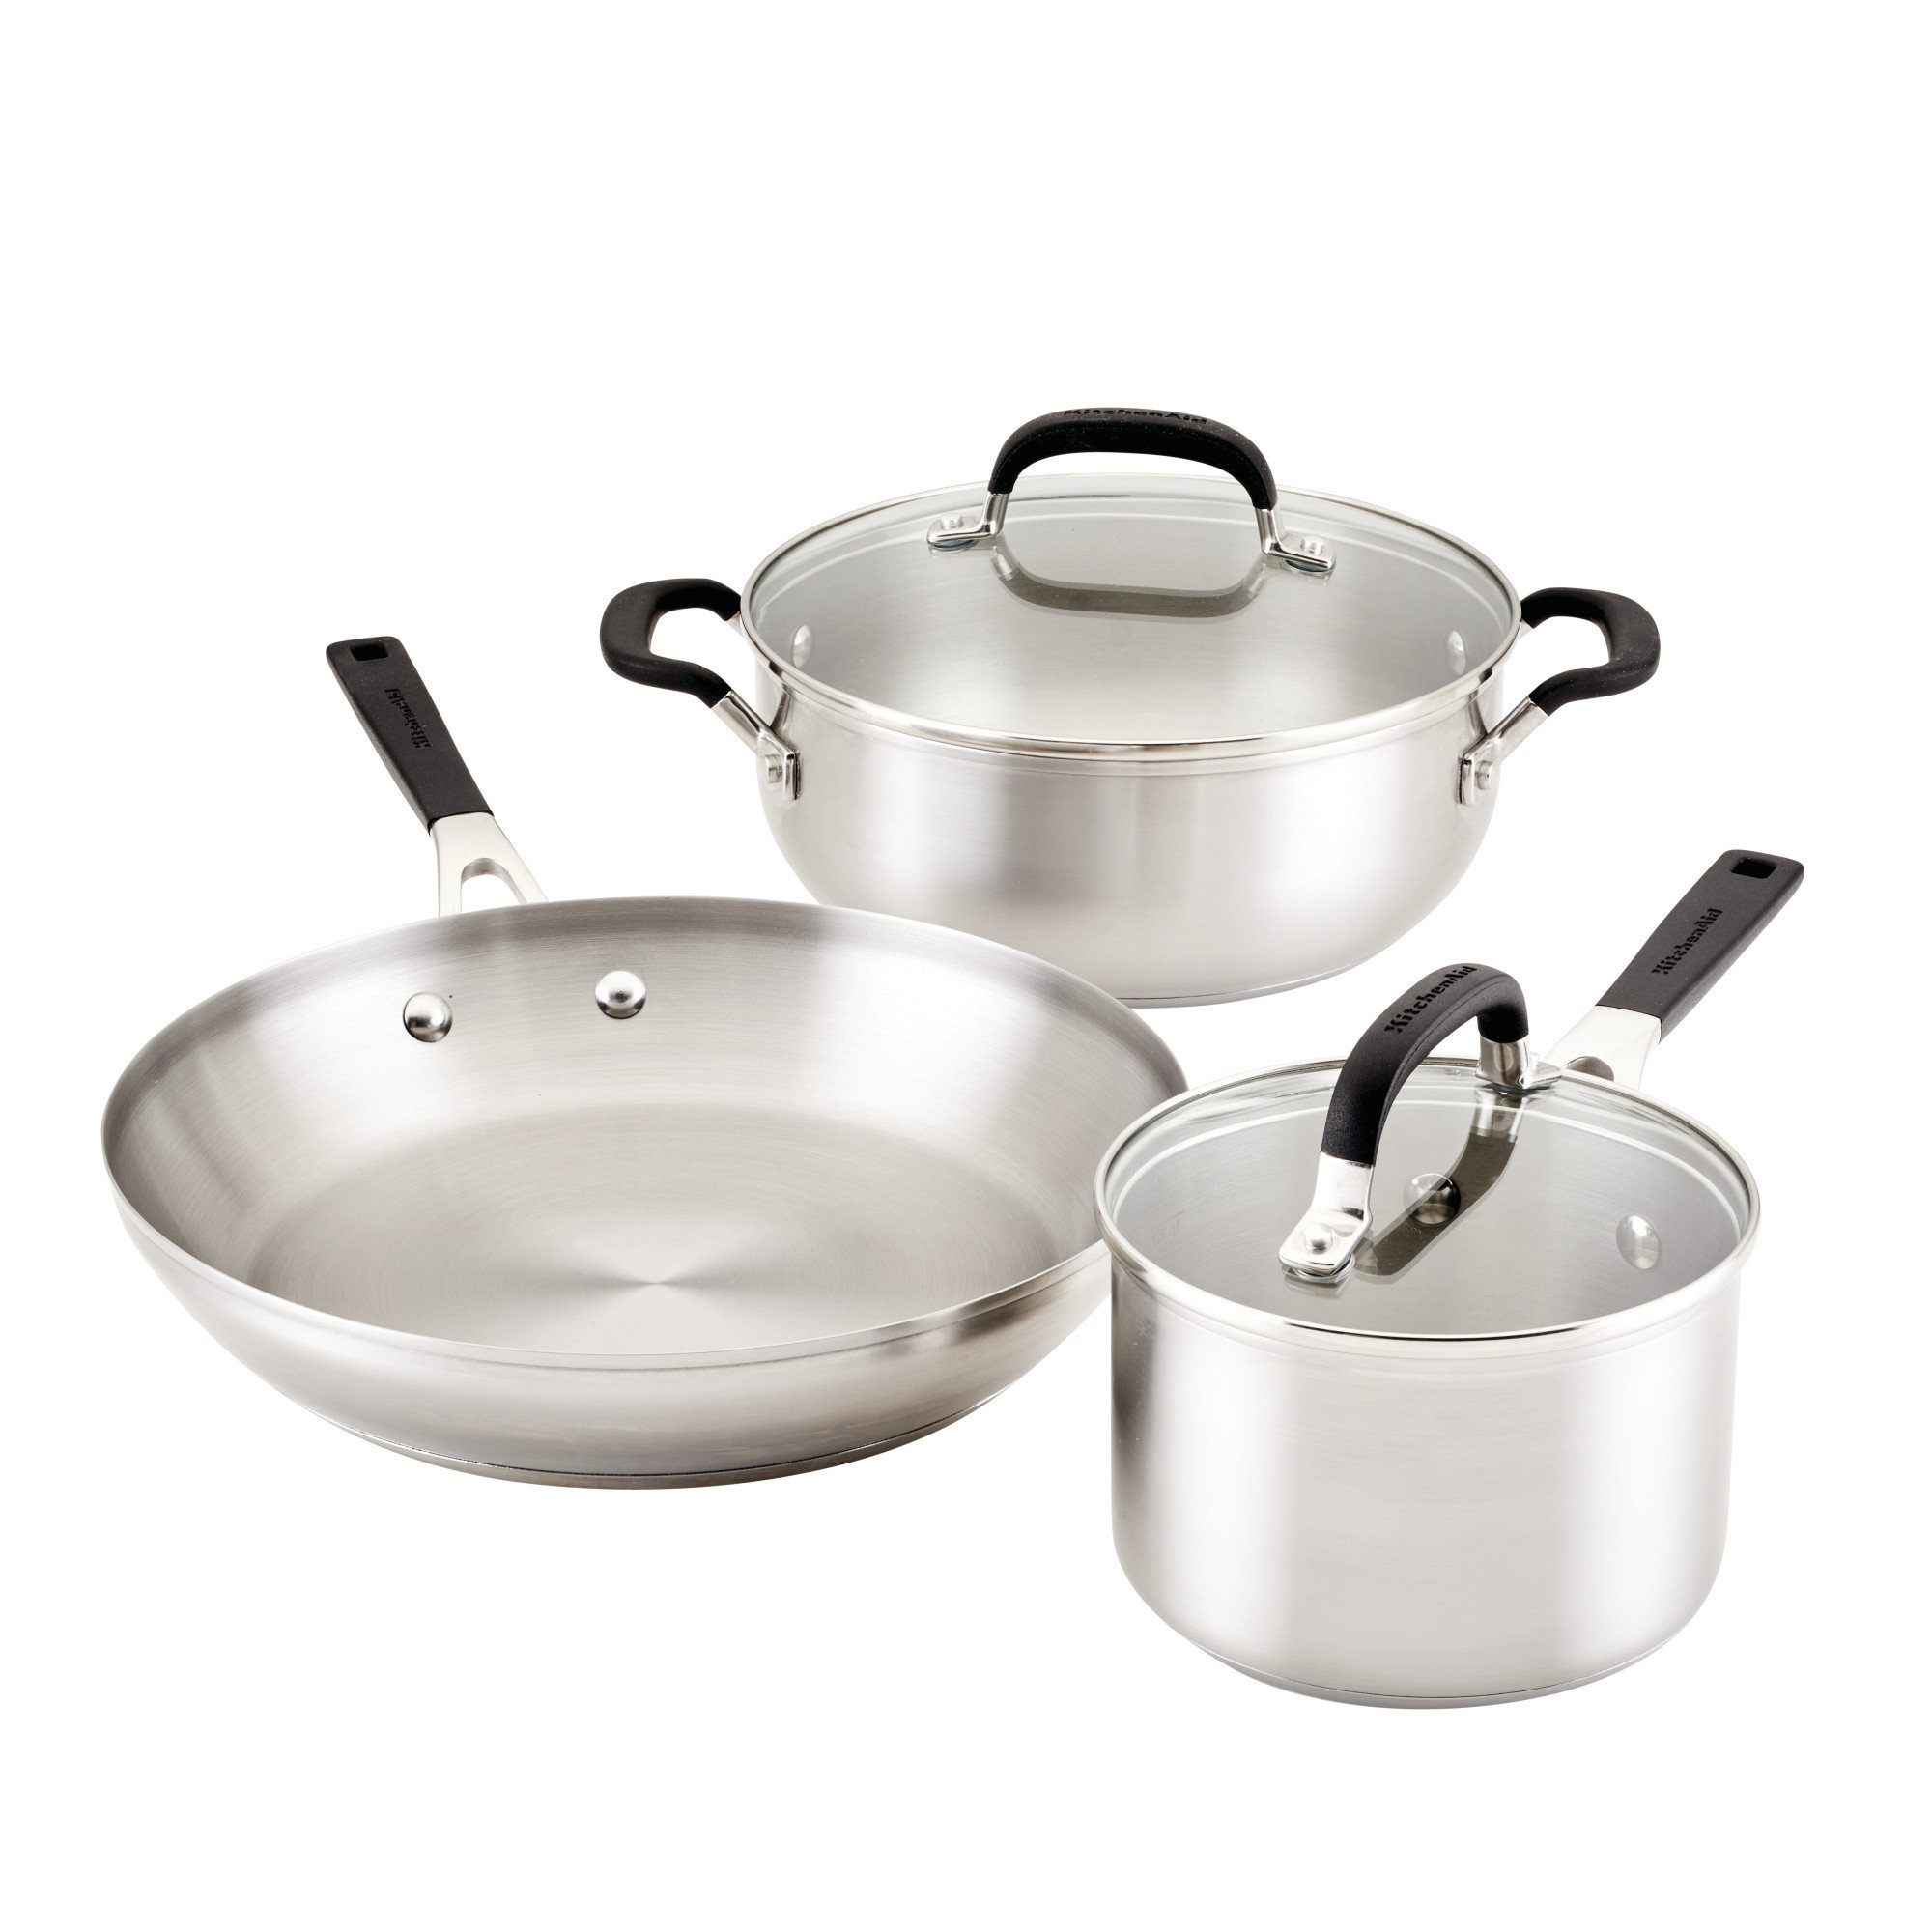 KitchenAid Stainless Steel 3-Layer Non-Stick 7 Piece Cookware Pots and Pans  Set, Clad, Induction, Oven Safe,Silver